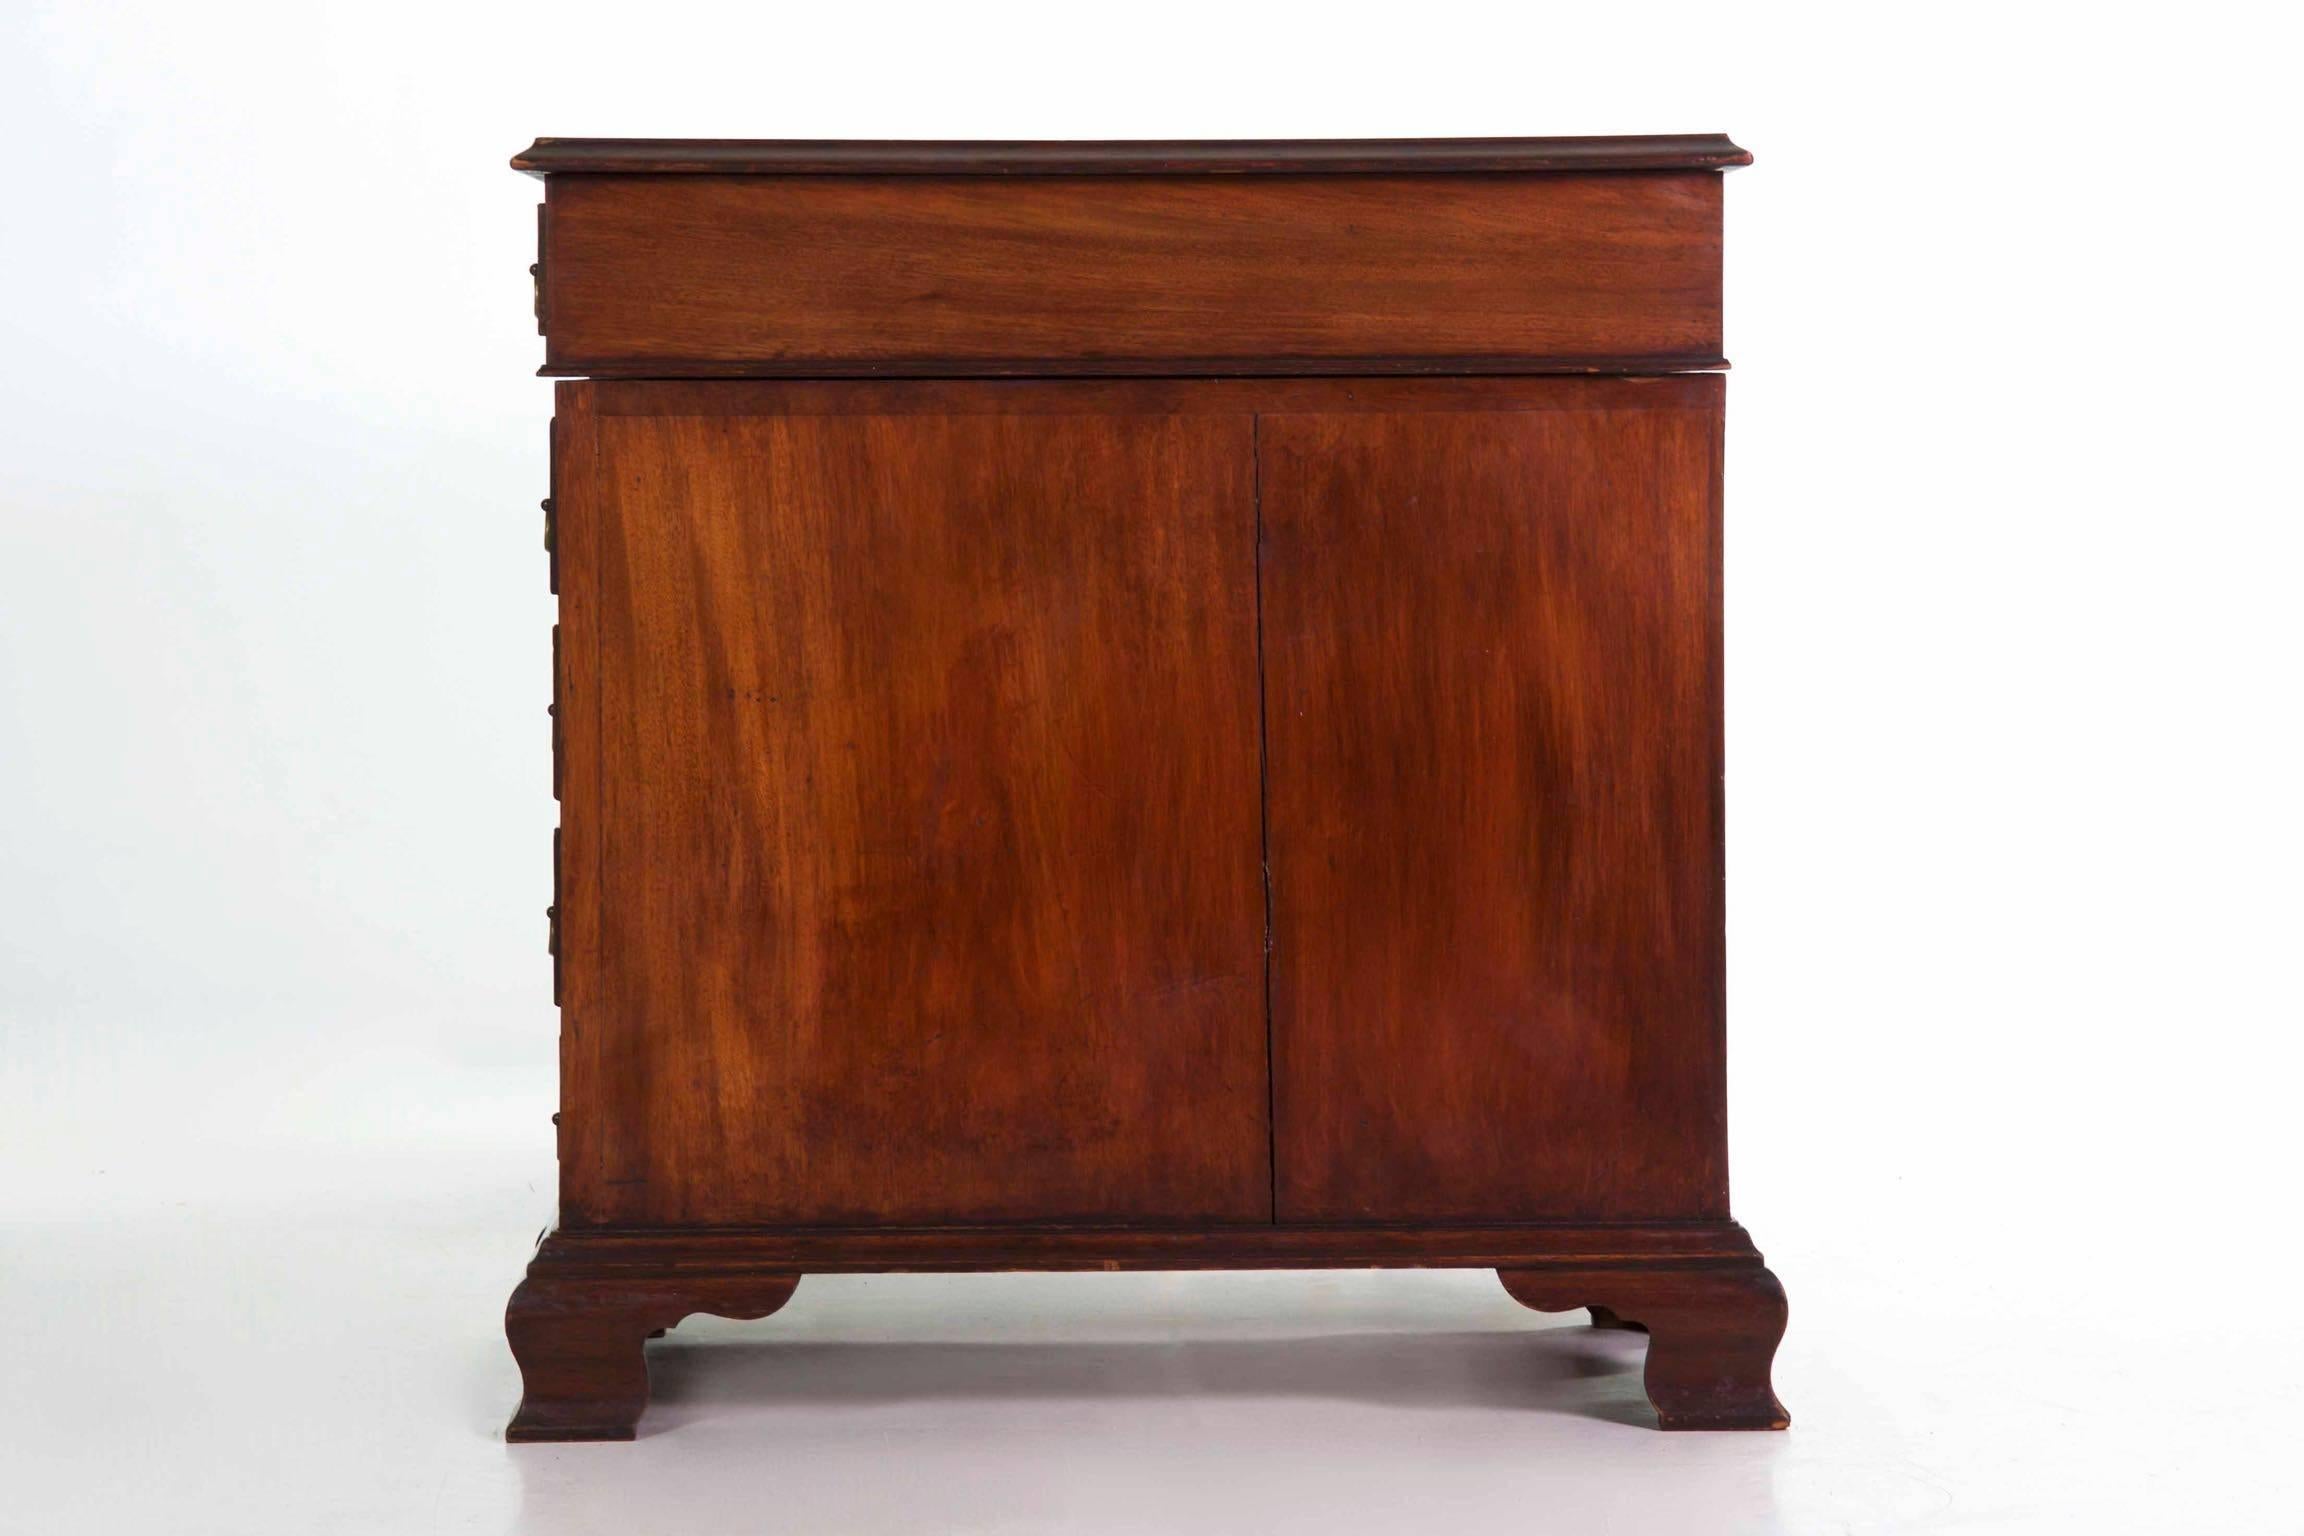 Oak 20th Century English George III Style Mahogany and Leather Antique Pedestal Desk